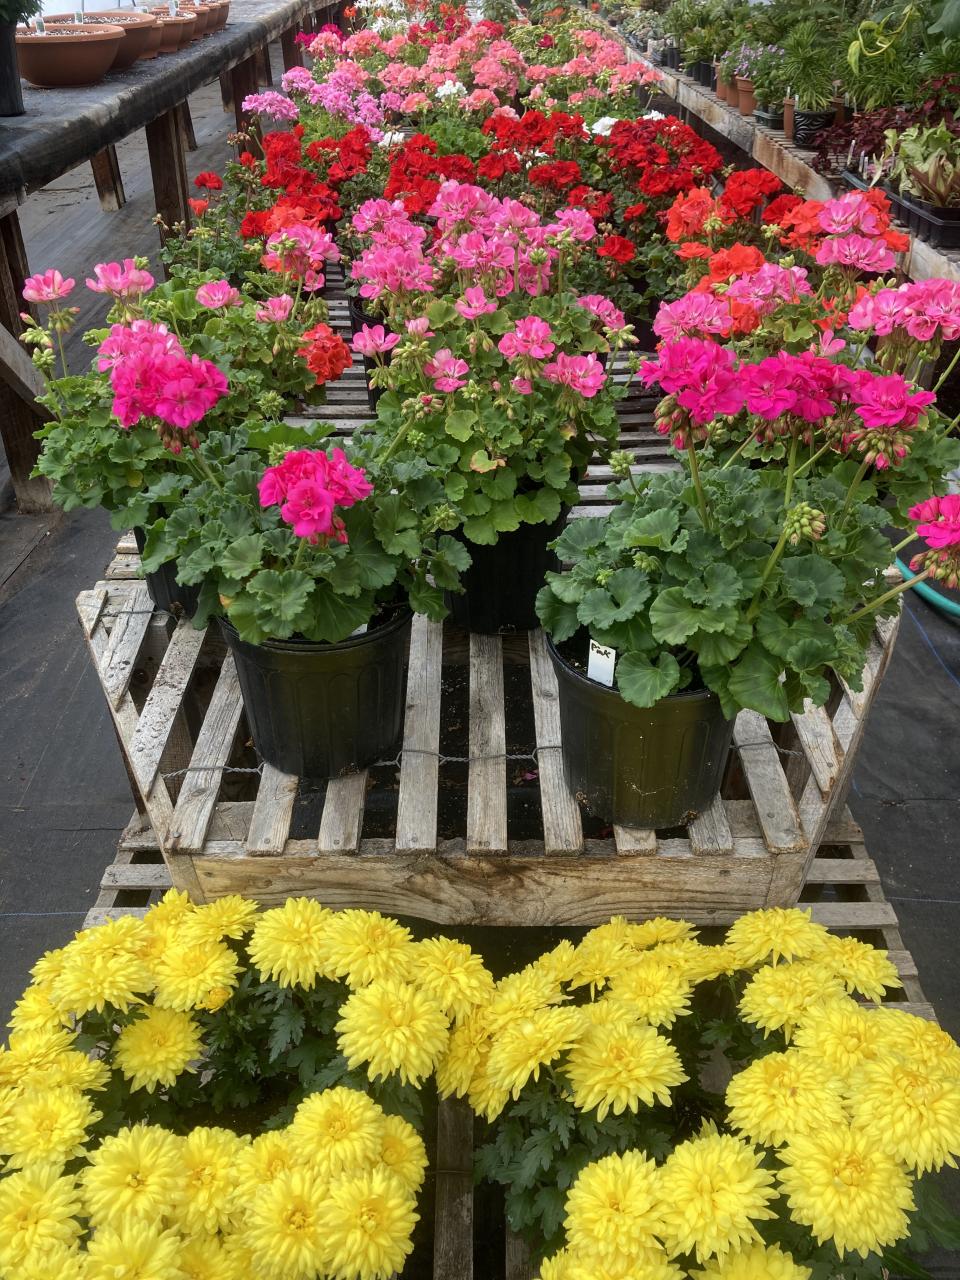 Bright pink potted geraniums sit in a greenhouse next to potted yellow zinnias.